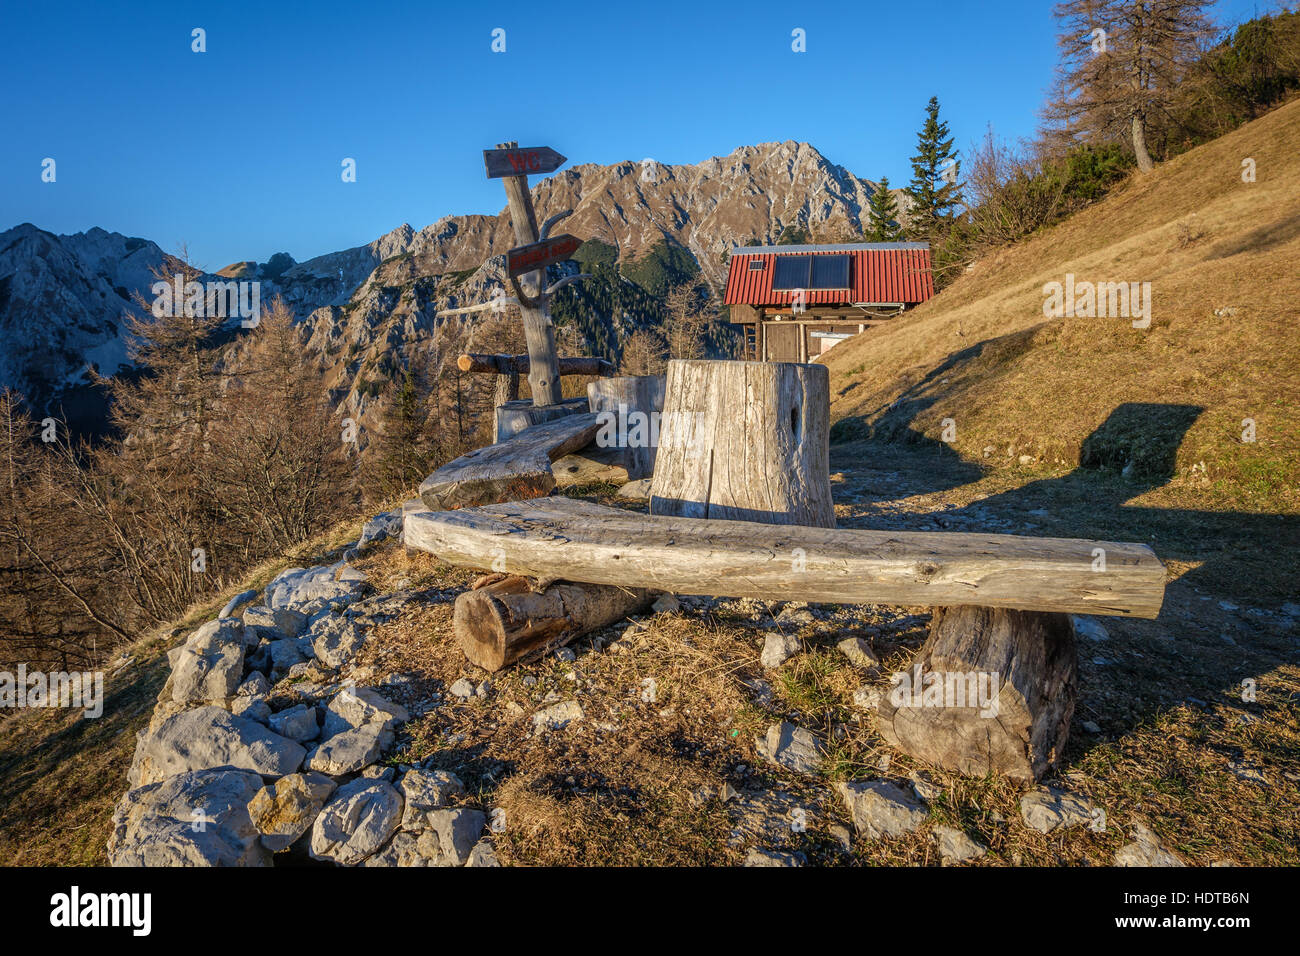 A bench in the mountains in the evening light Stock Photo